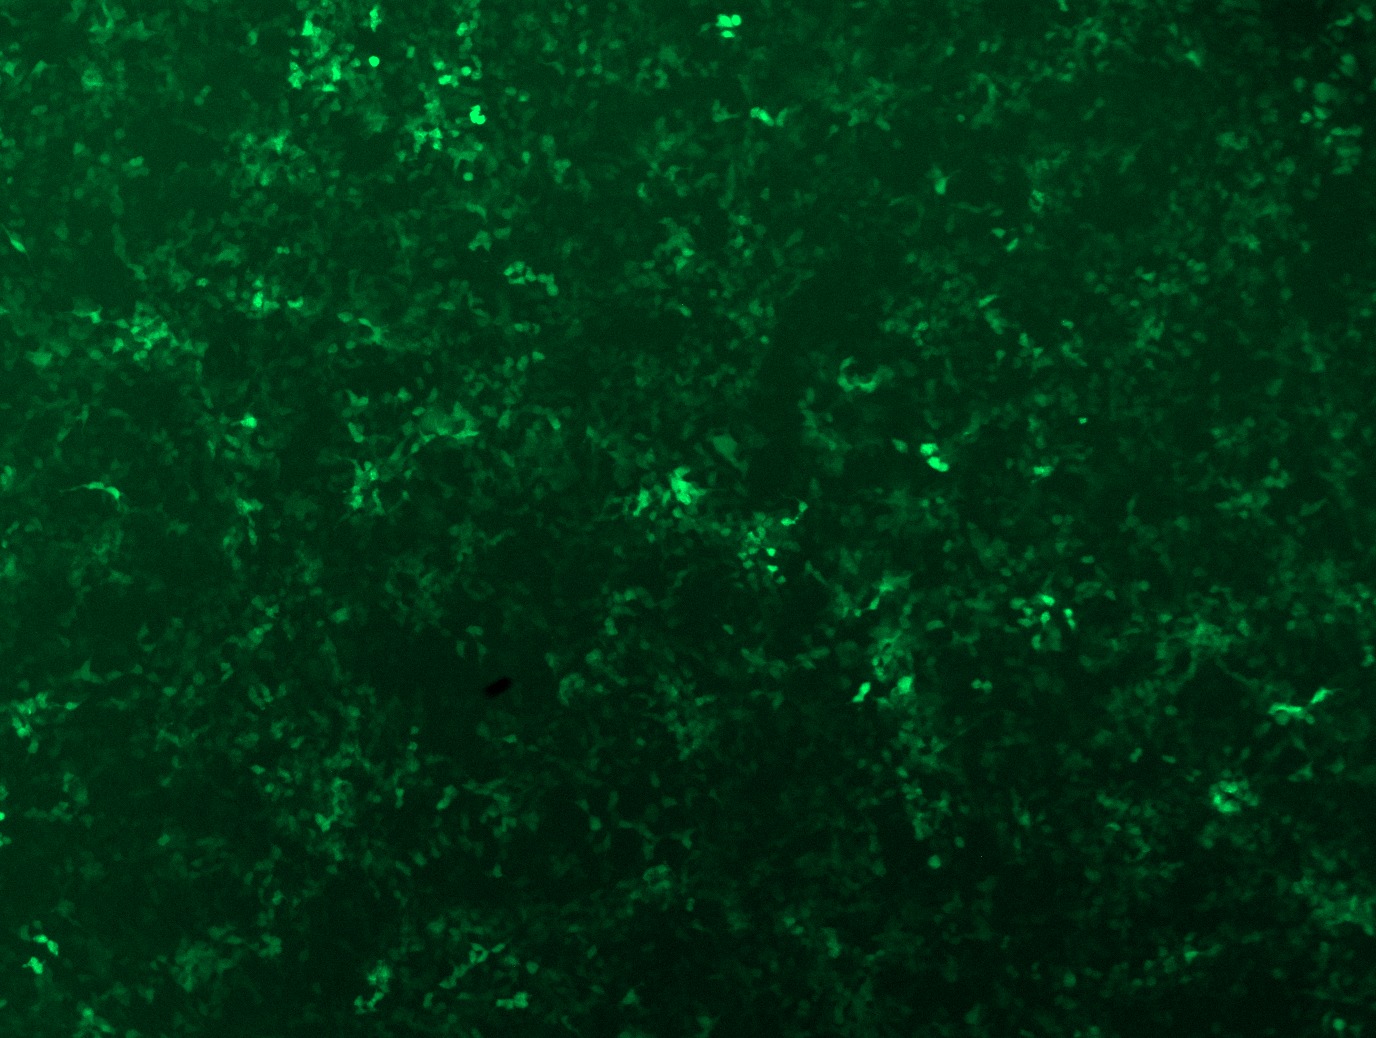 GFP signal was observed under microscope at 48 hours after transduction of TL514508A virus into HEK293 cells. TL514508A virus was prepared using lenti-shRNA TL514508A and TR30037 packaging kit.